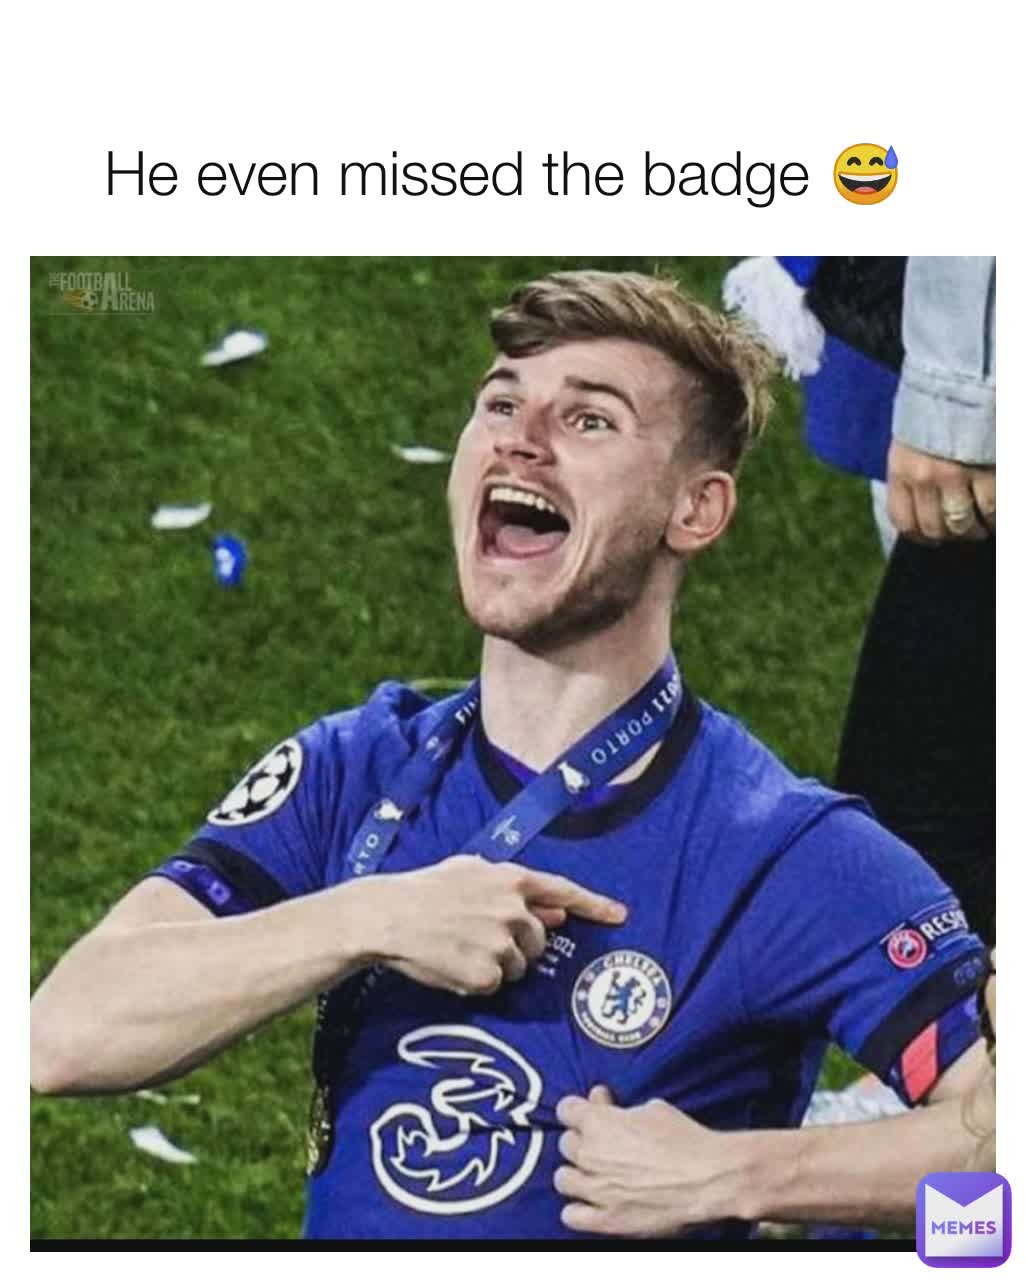 He even missed the badge 😅